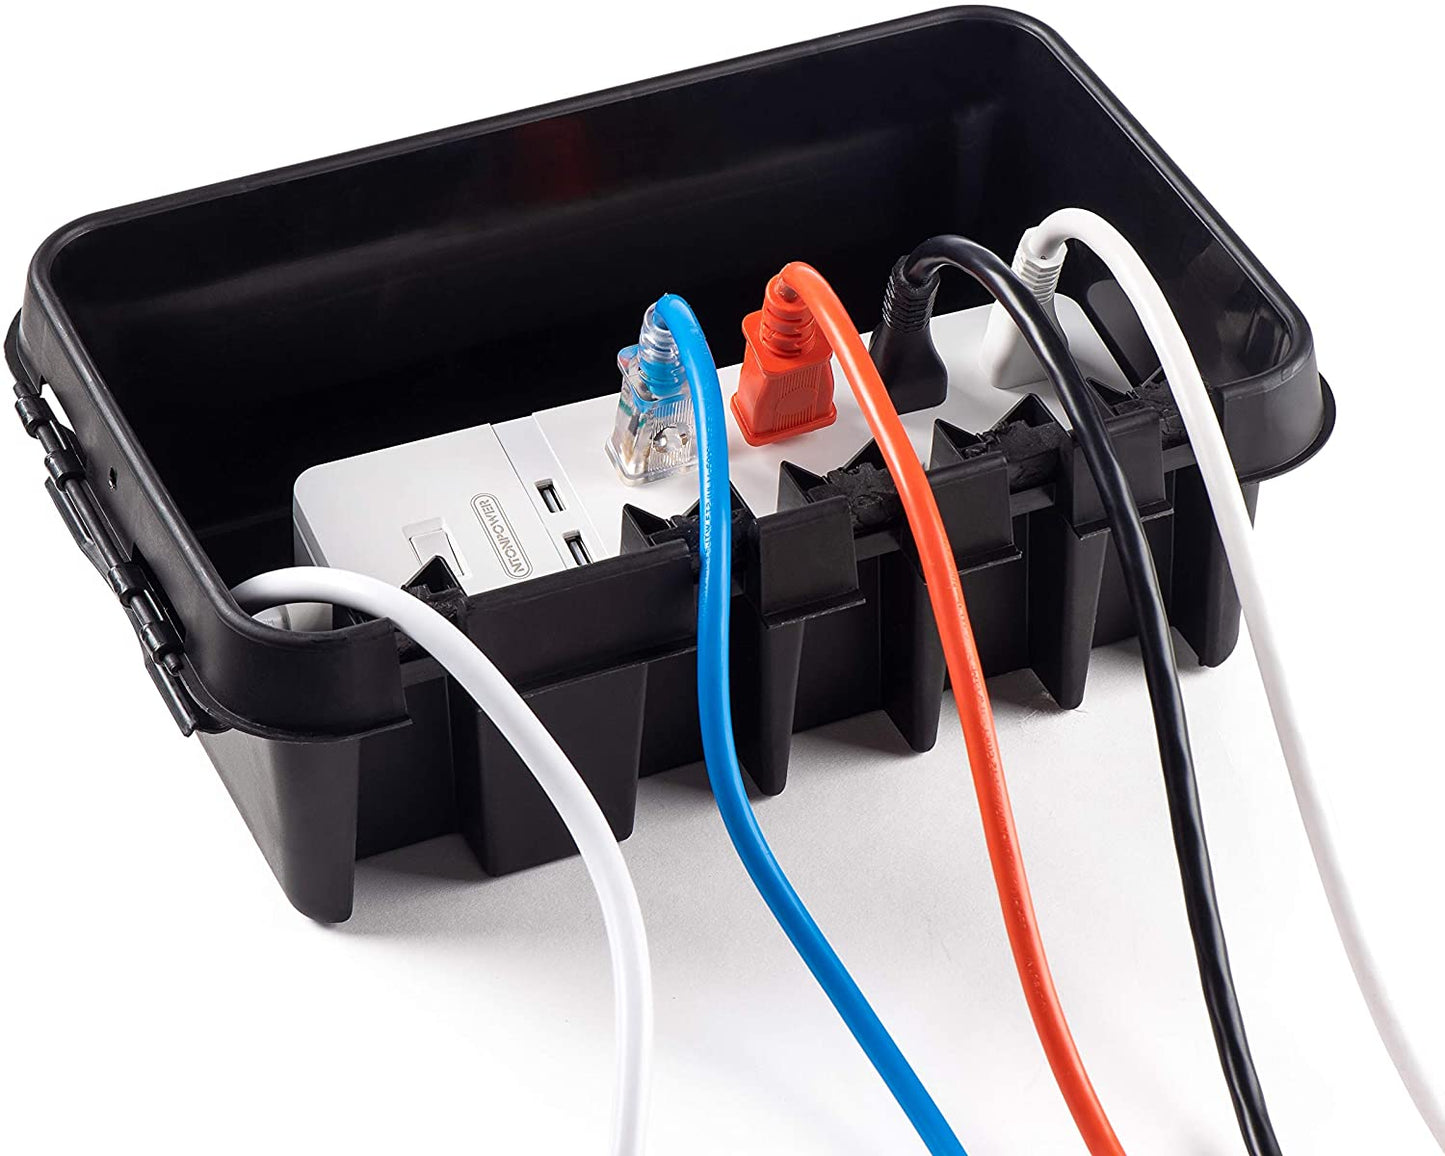 Weatherproof Connection Box - For power strips and extension cords